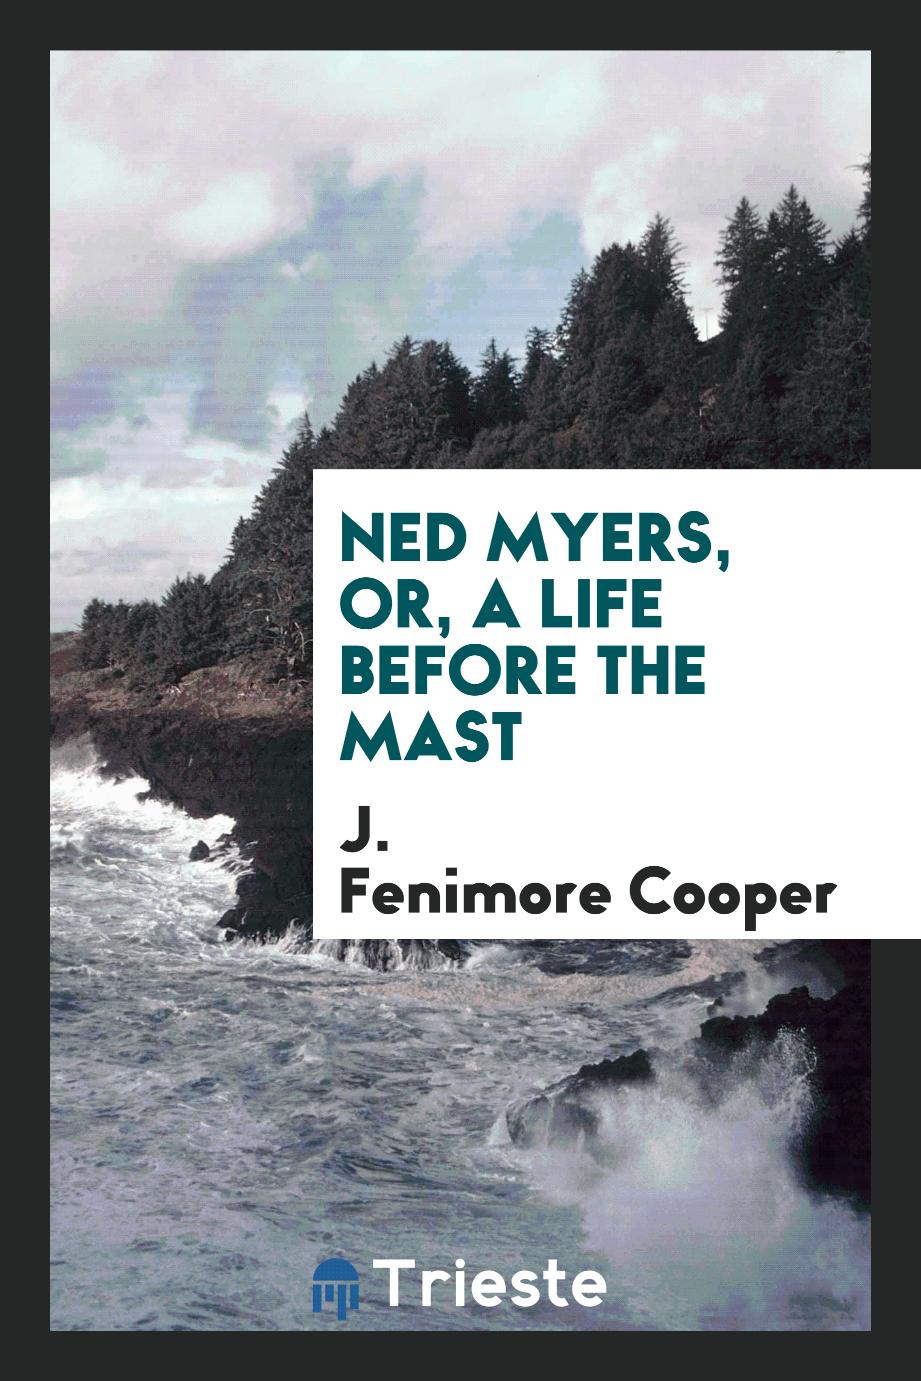 J. Fenimore Cooper - Ned Myers, or, A life before the mast